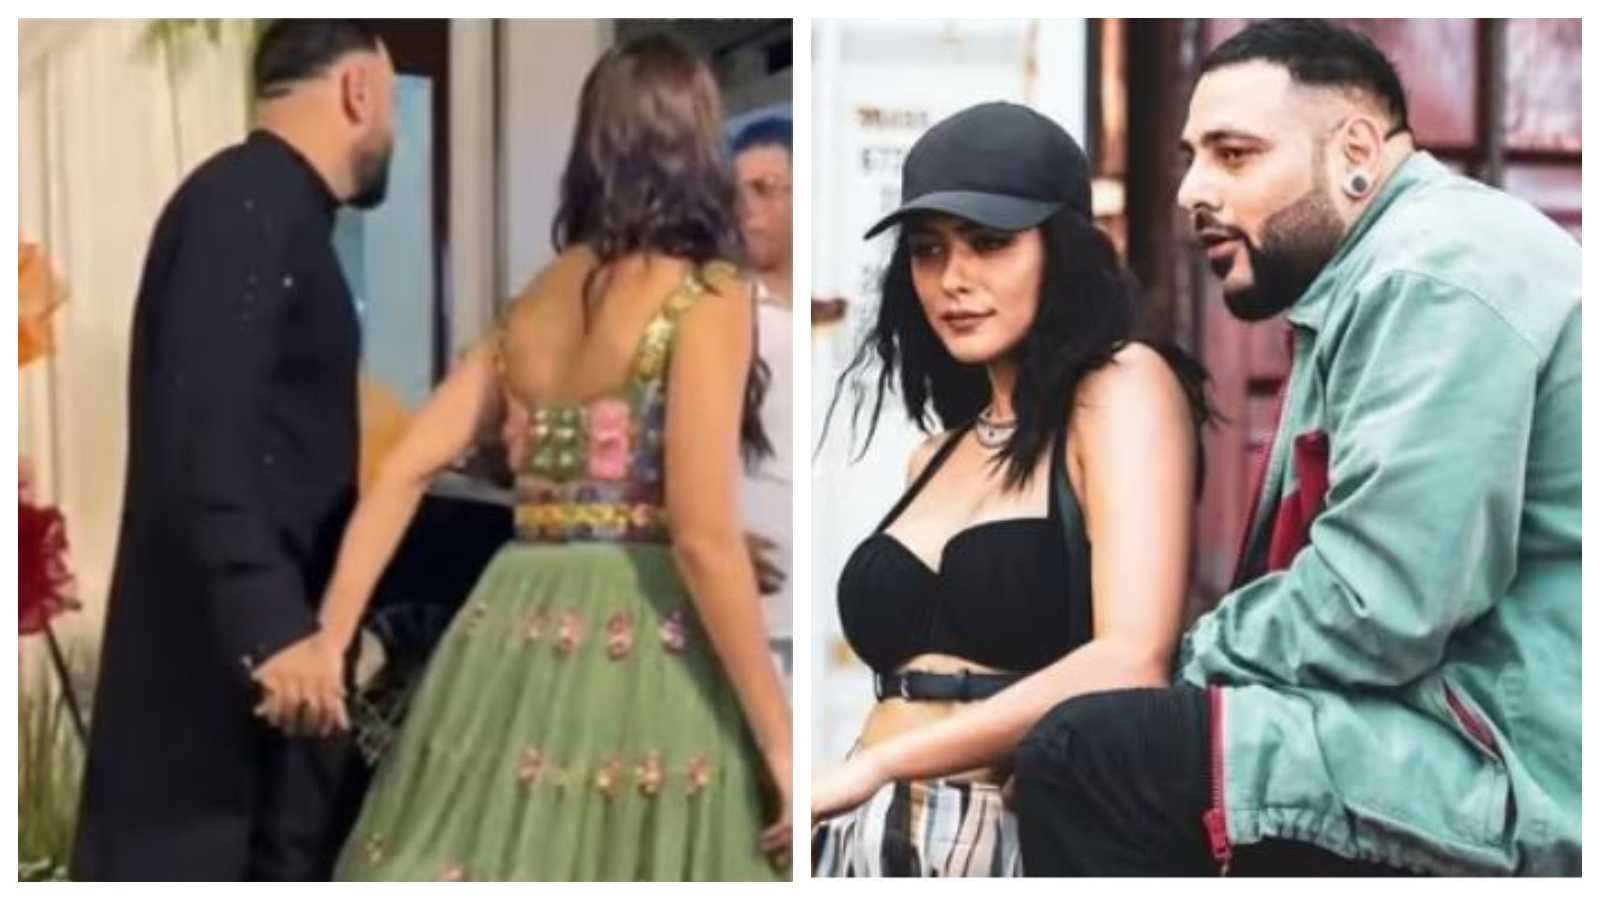 Mrunal Thakur and Badshah exiting Shilpa Shetty Kundra's Diwali party hand-in-hand sparks dating rumours